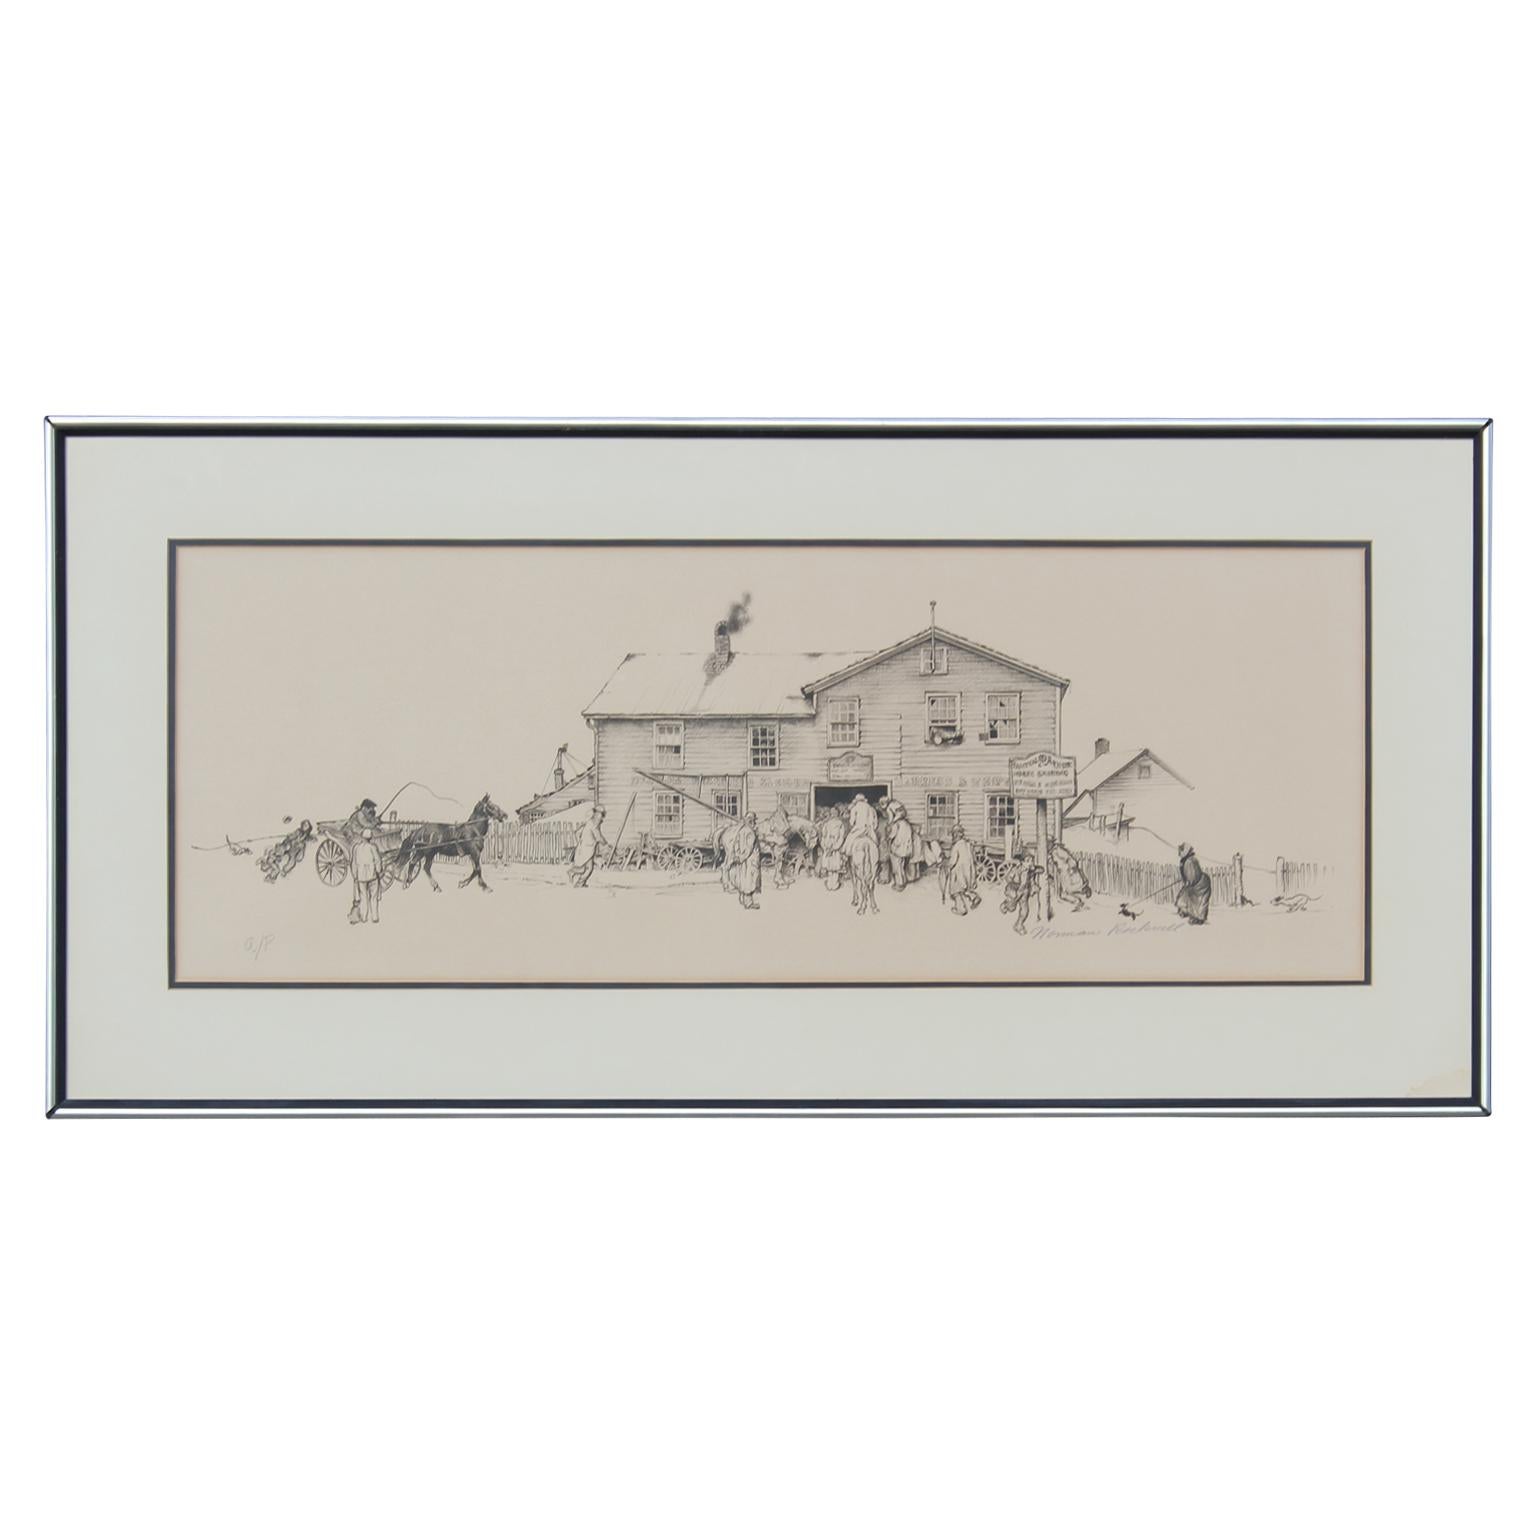 Limited Edition Blacksmith Shop Landscape Lithograph - Art by After Norman Rockwell